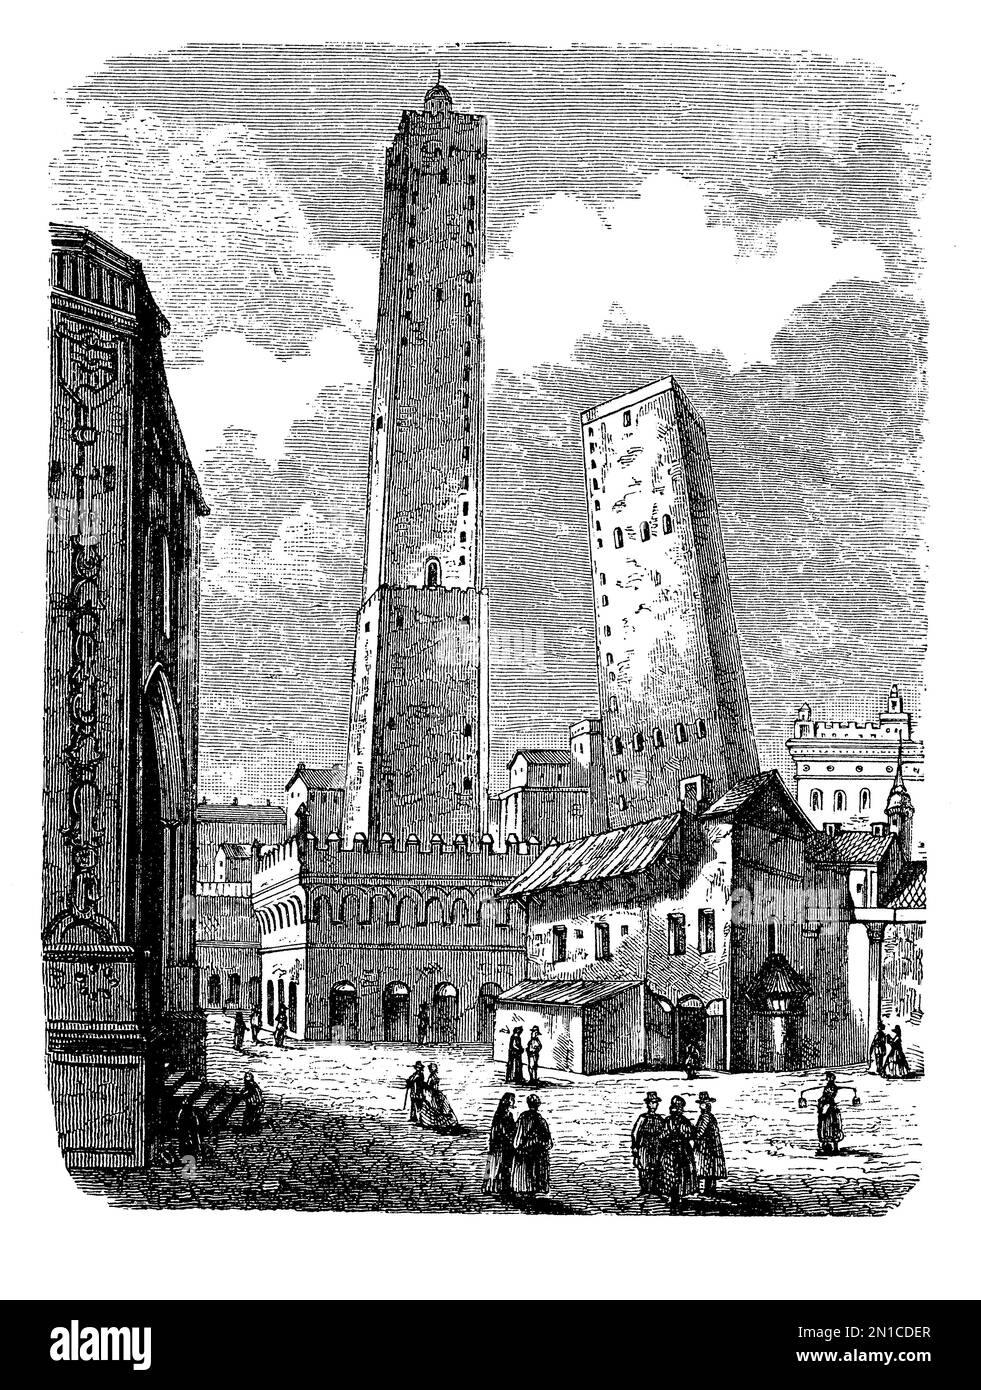 The two medieval towers of Bologna - Italy: Asinelli (98 mt.) and Garisenda (48mt.) used for offensive/defensive purposes and symbol of power of the r Stock Photo